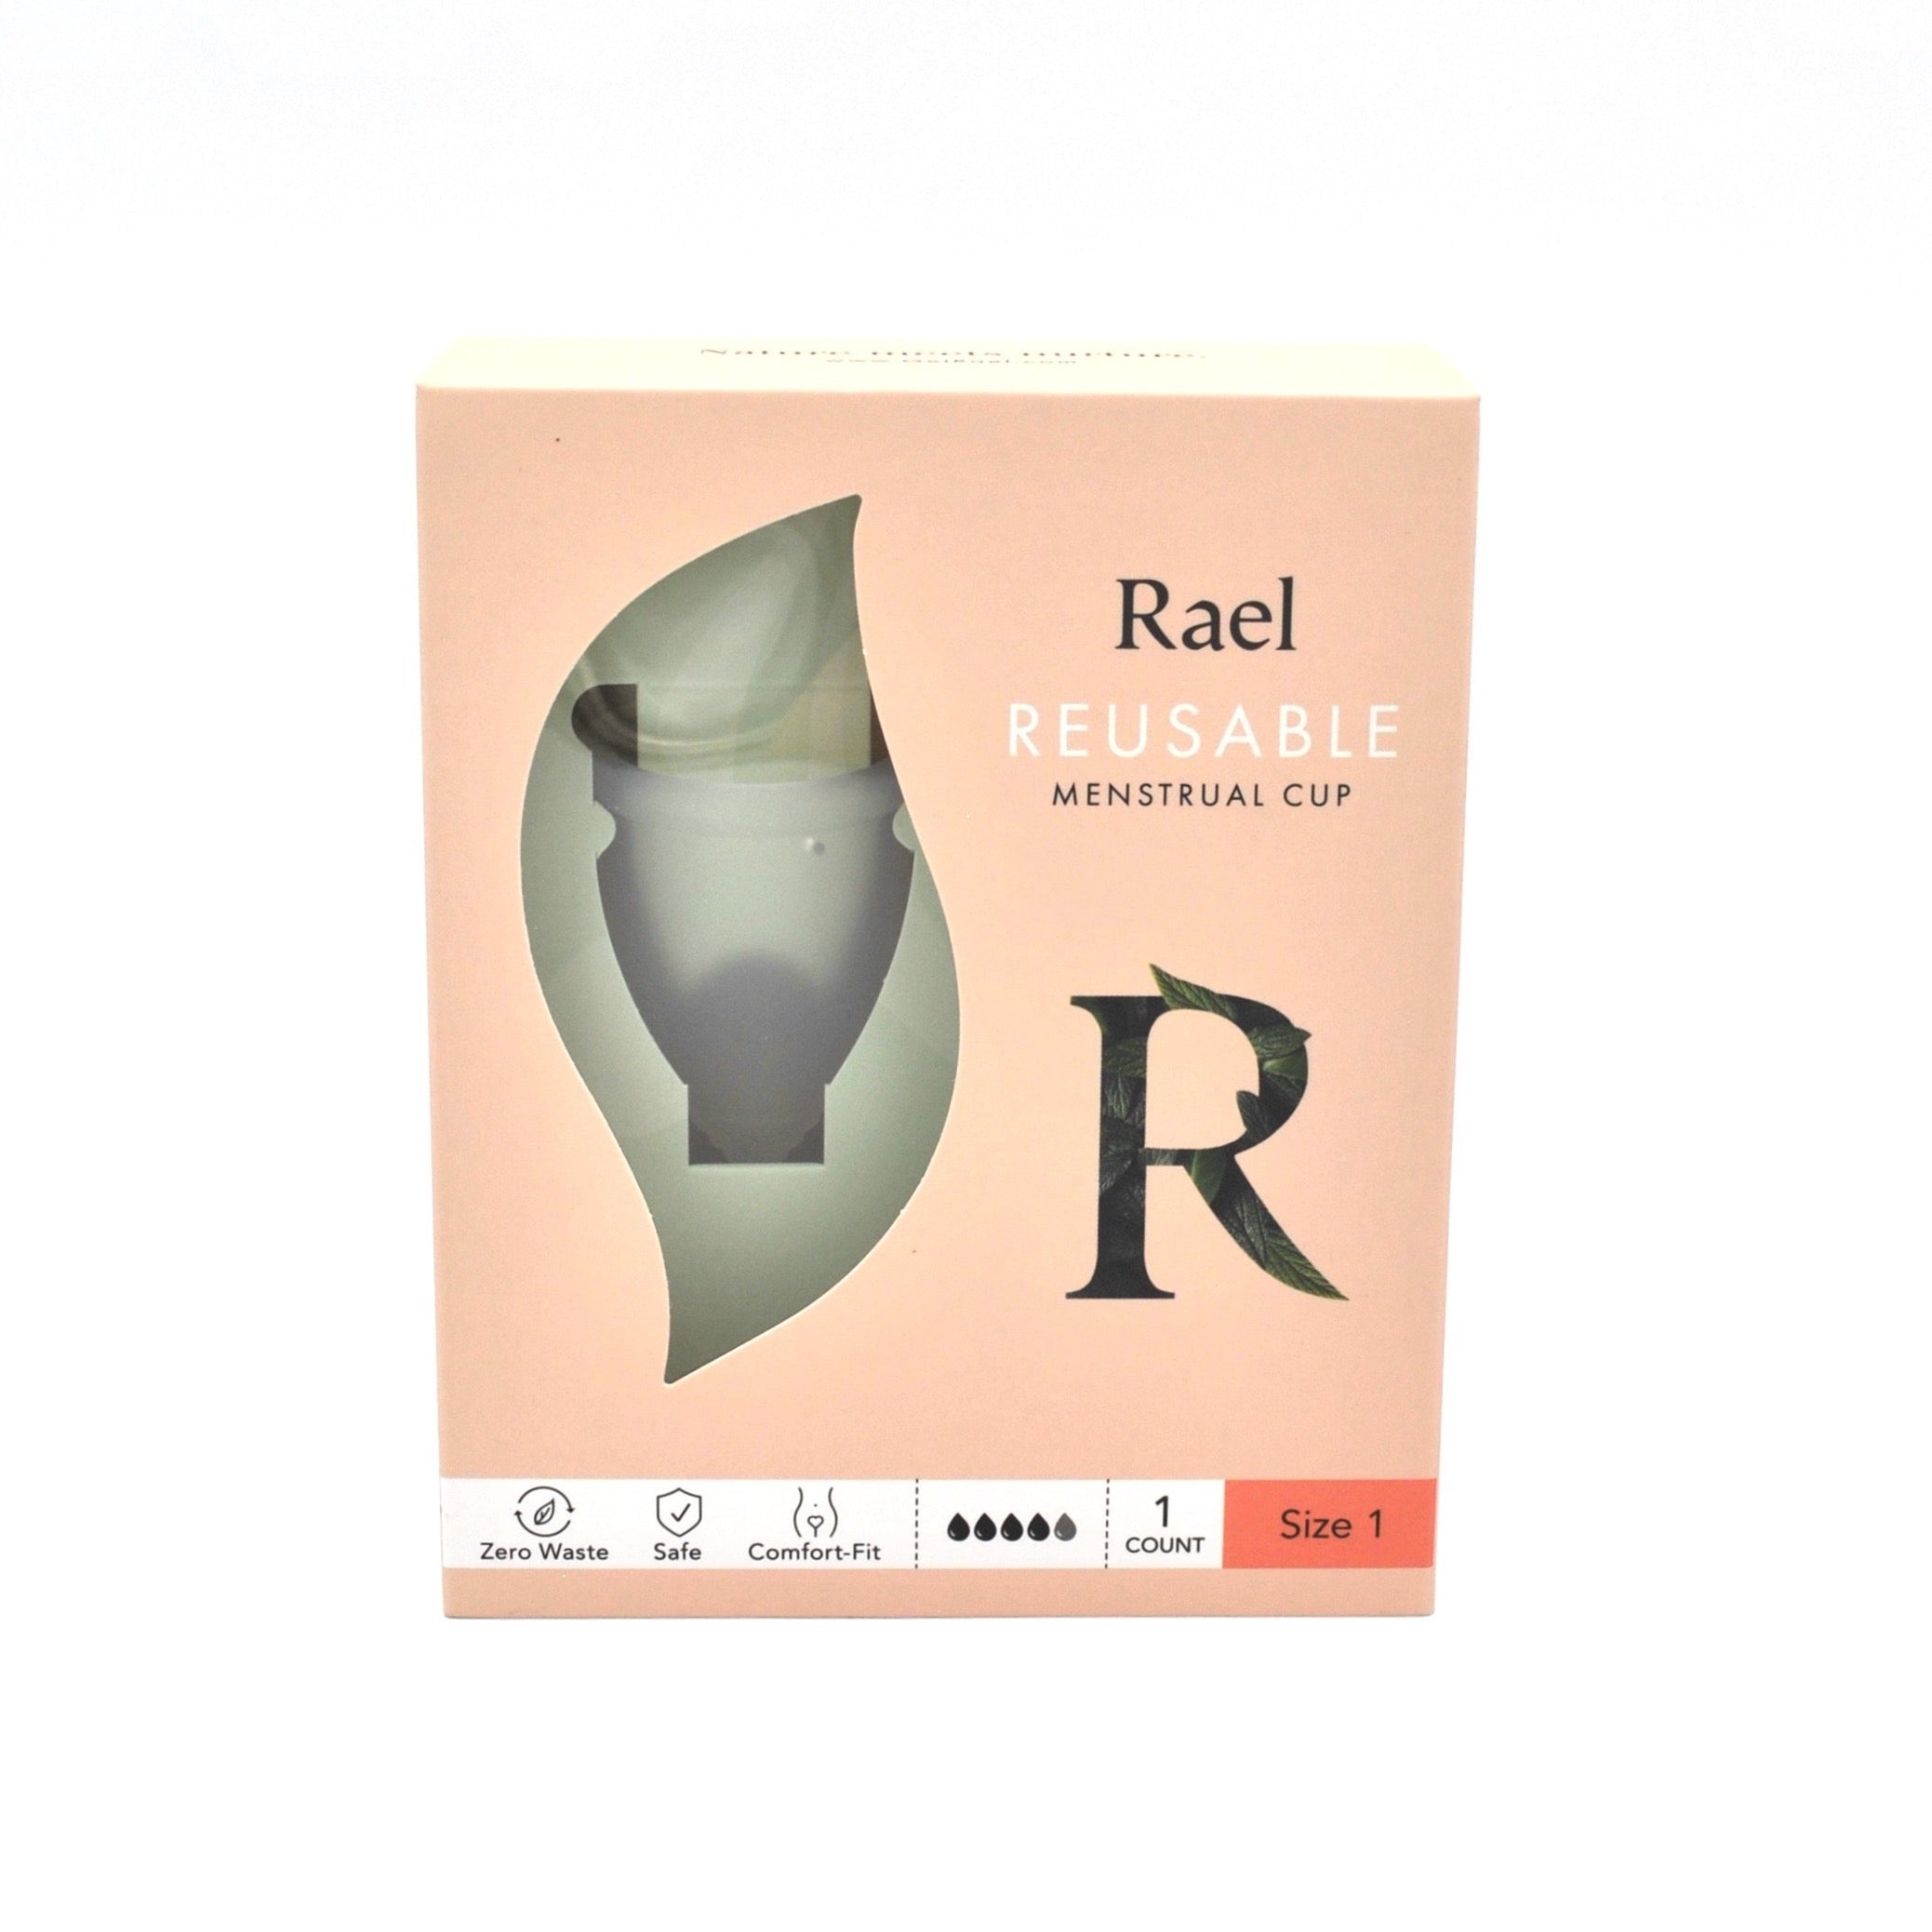 Rael Reusable Case for Cups - BPA-Free Container for Menstrual